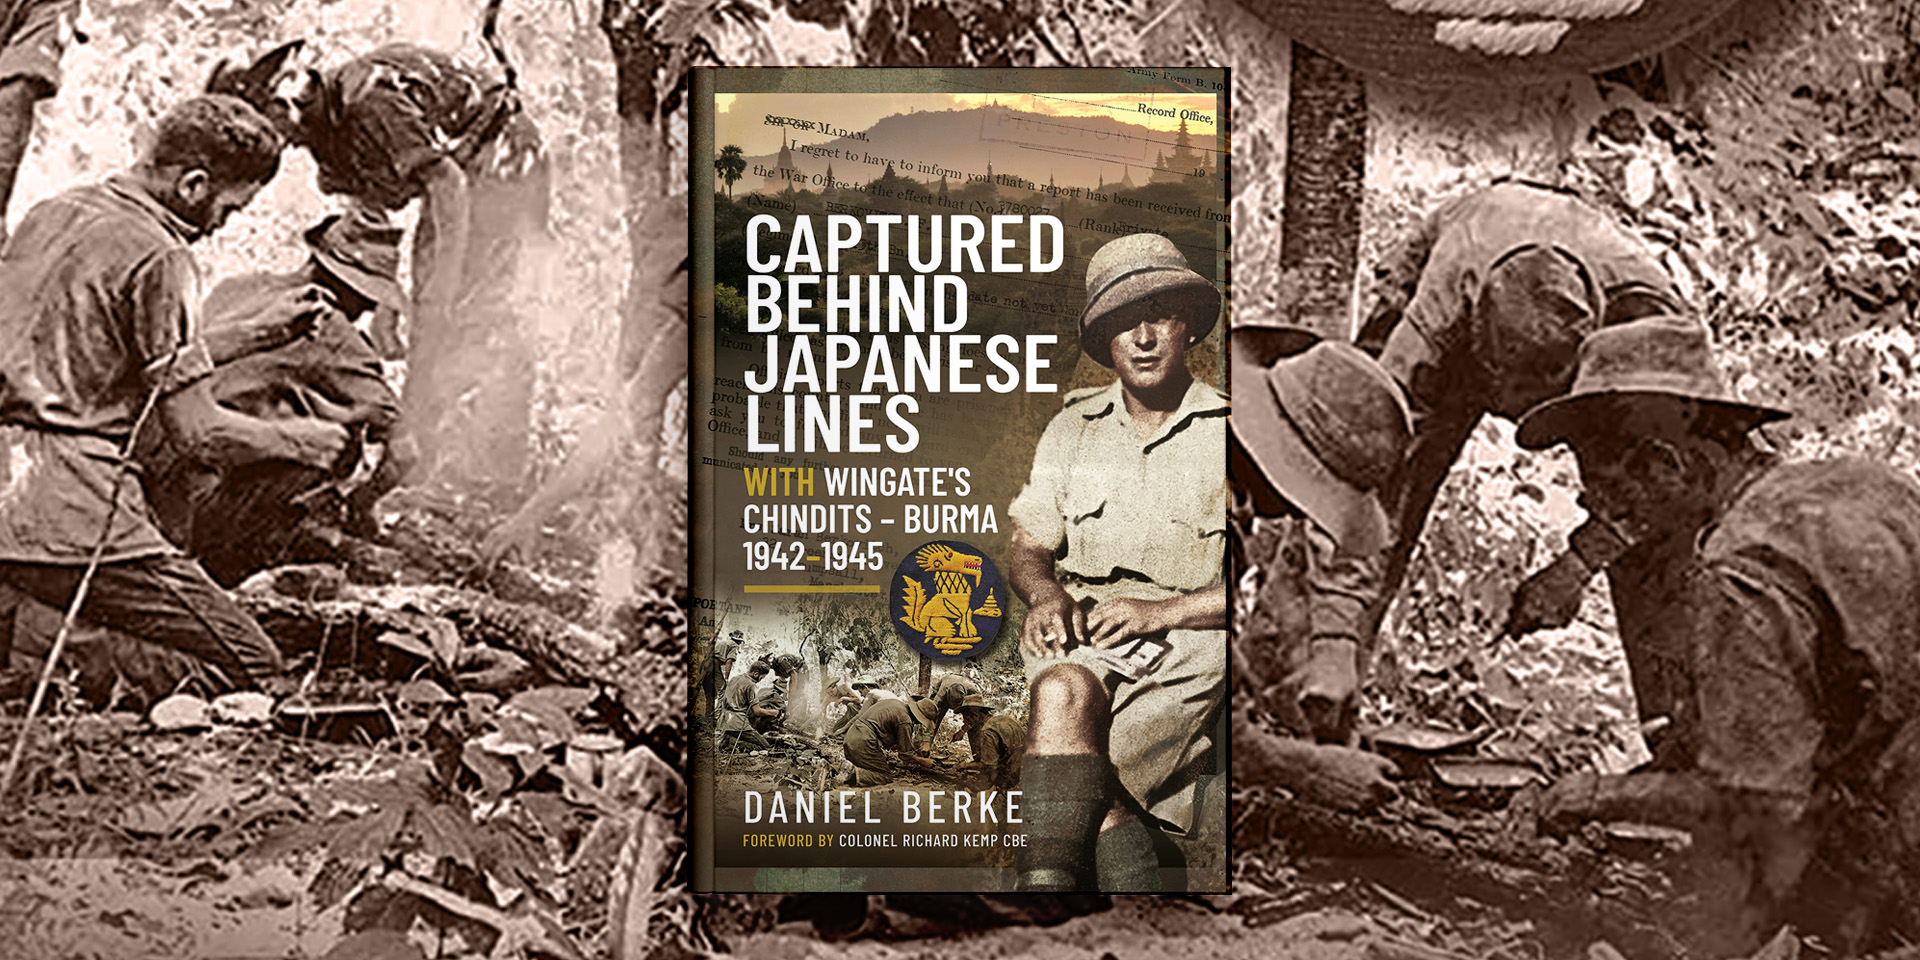 'Captured Behind Japanese Lines' book cover